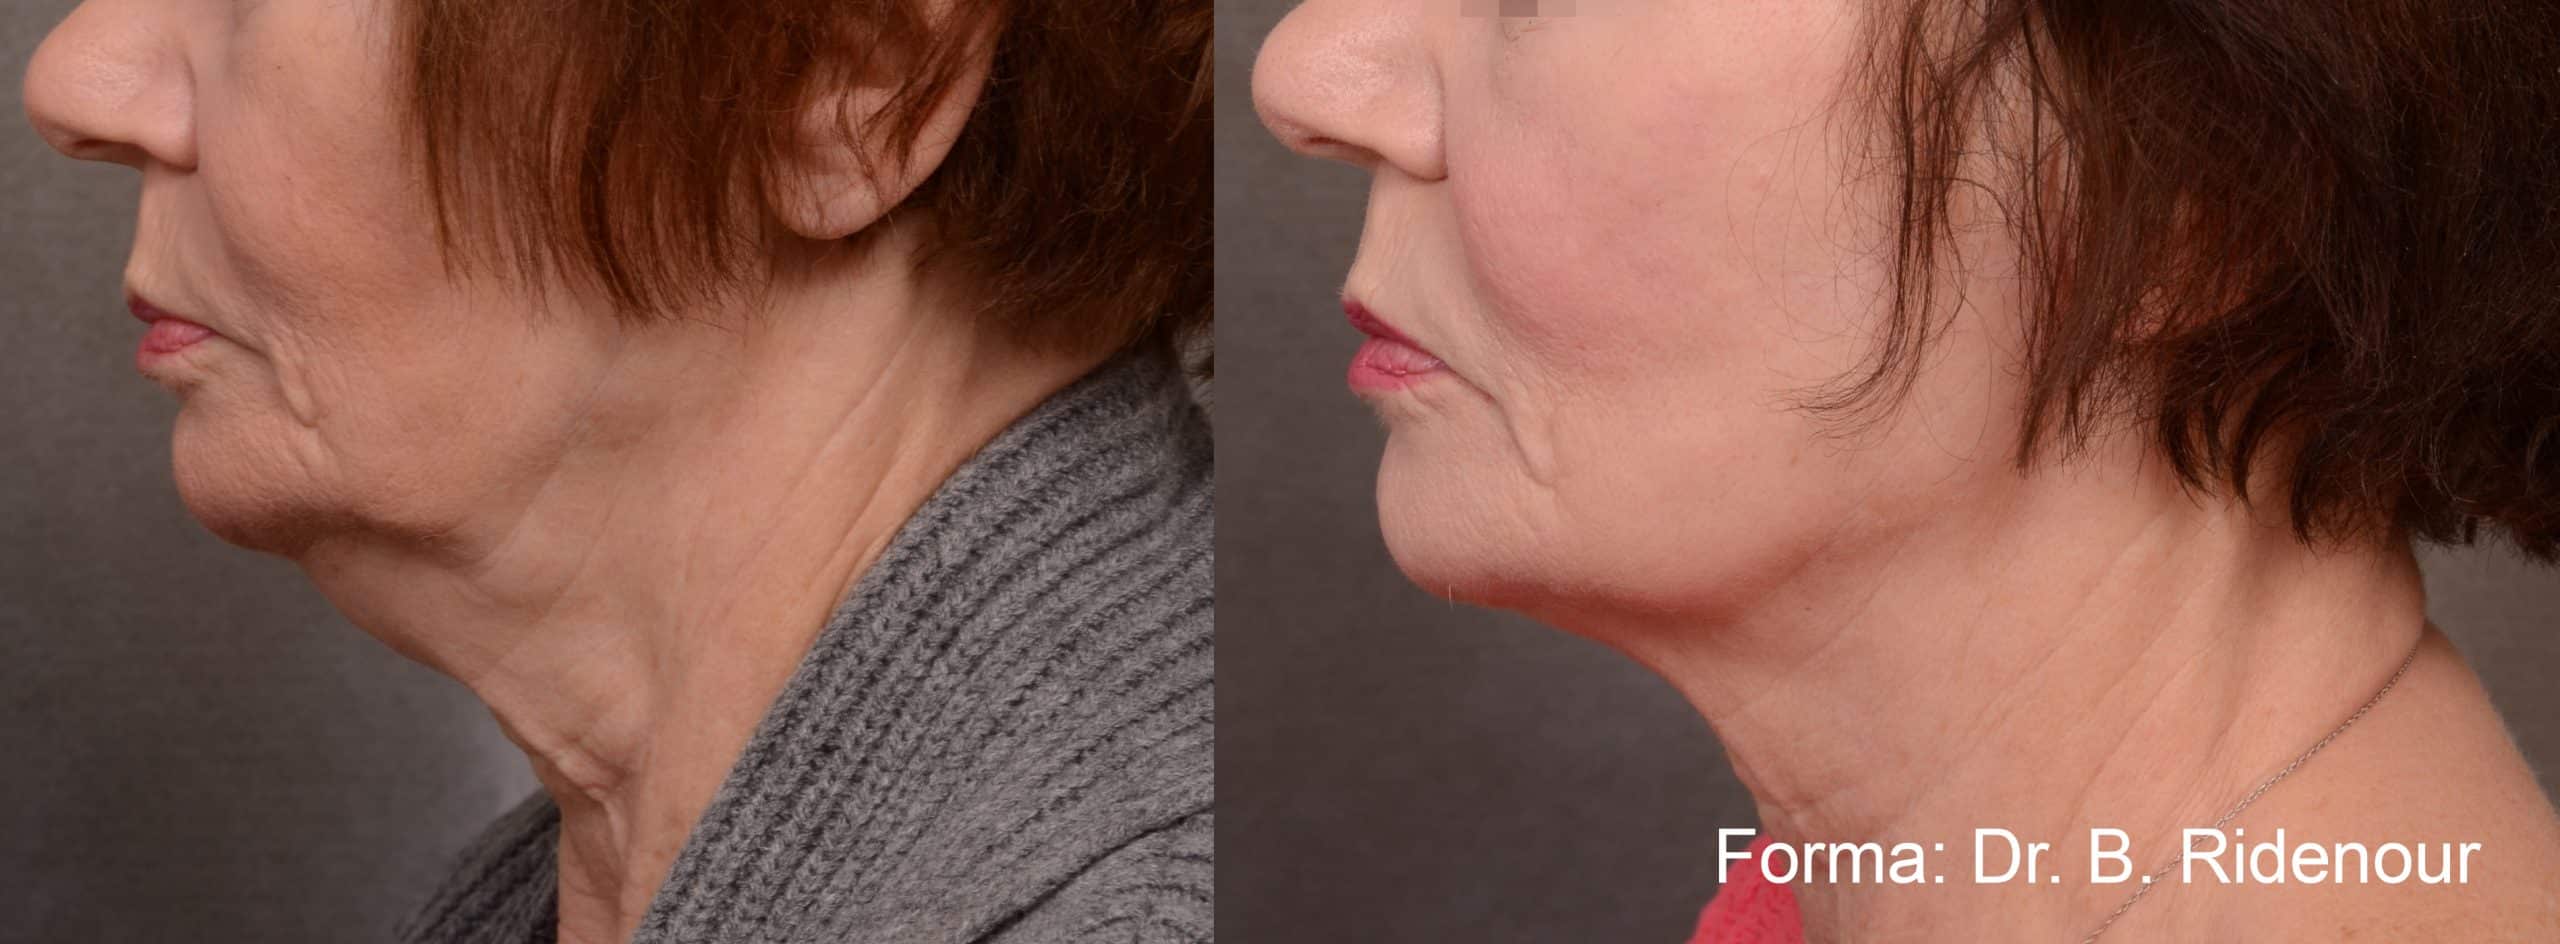 forma-before-after-dr-b-ridenour-preview-1